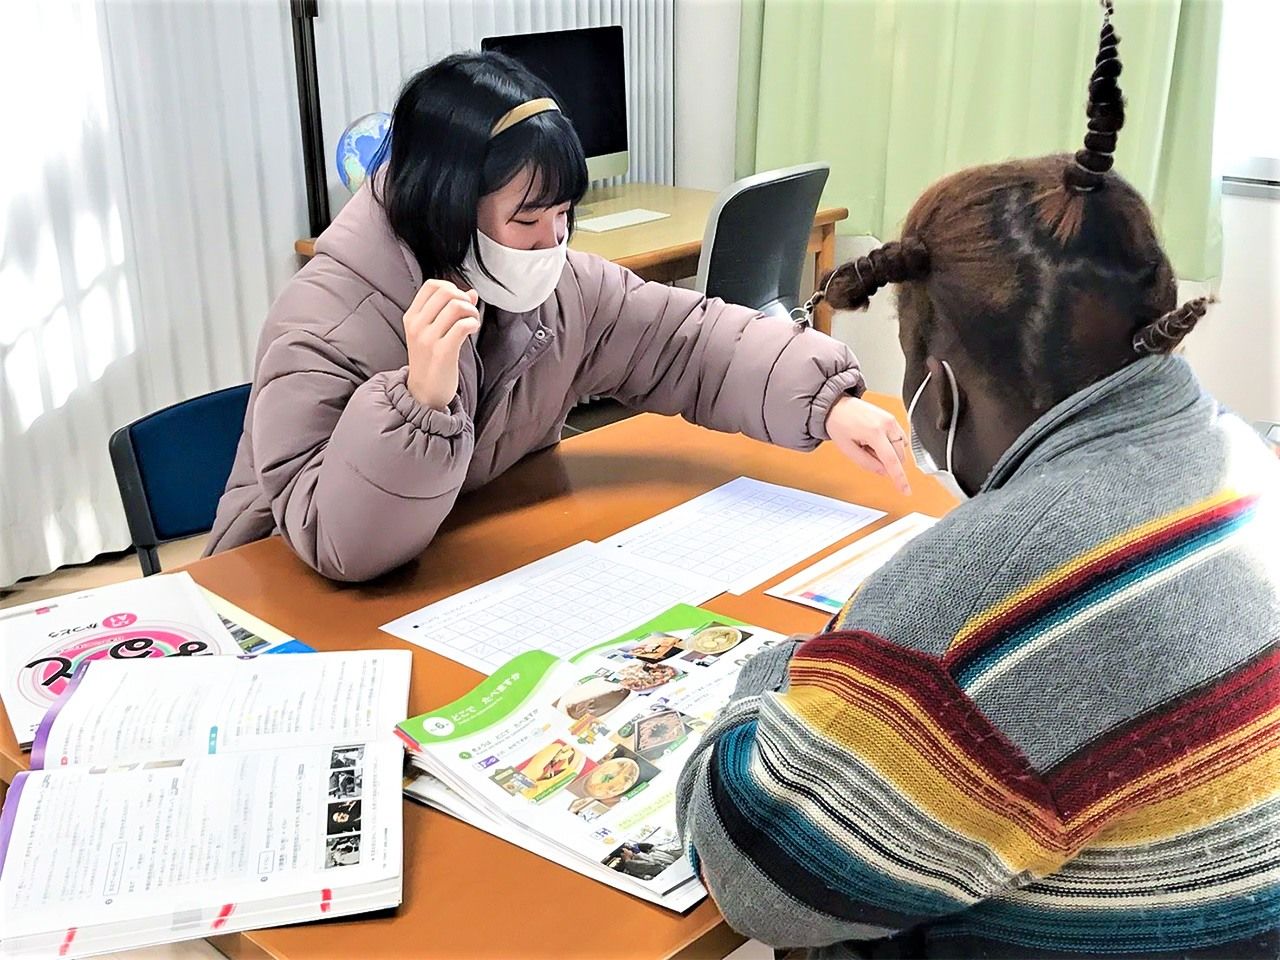 Oikawa on her first day at the refugee center teaches Japanese to a resident from Africa.  She was introduced to the shelter by NGO chief Urushibara Hiroshi, who helped guide the facility through the difficult process of applying for funding.